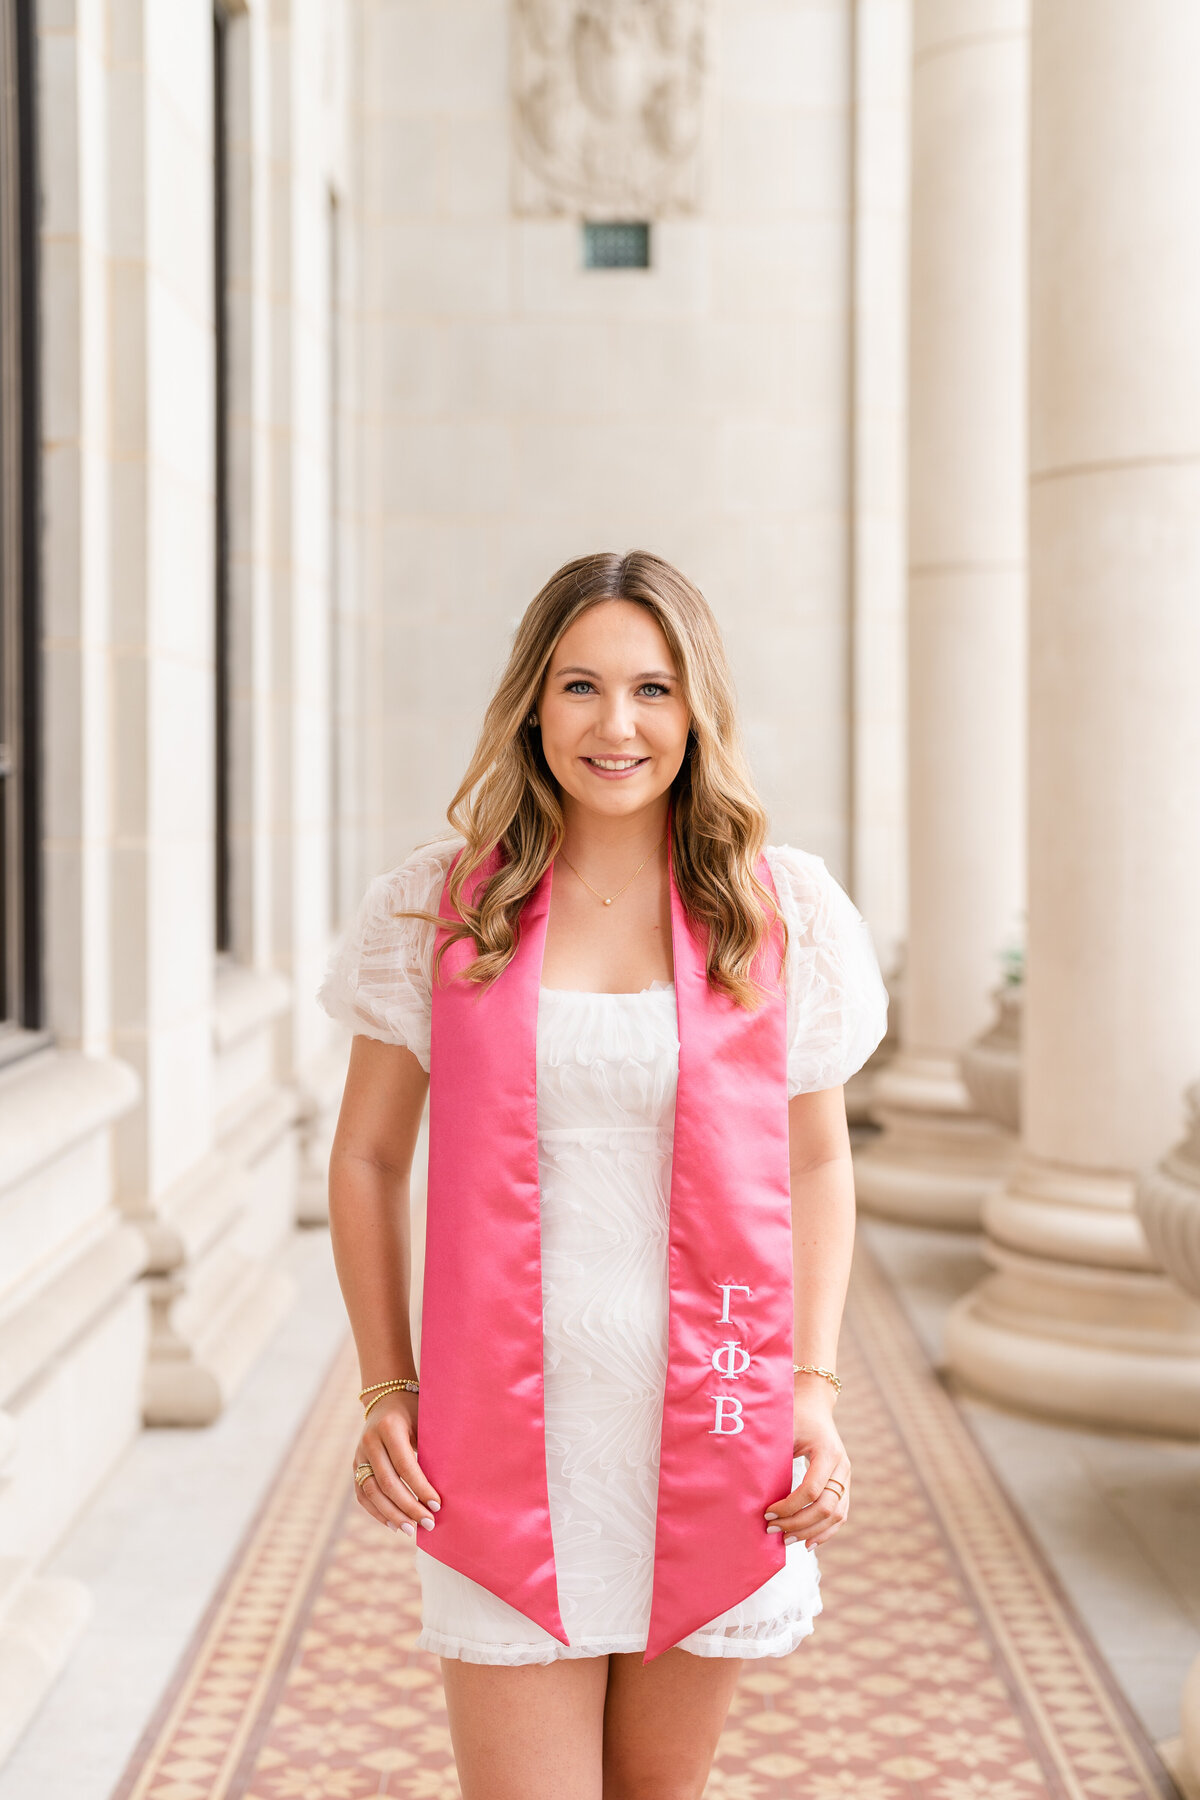 Texas A&M senior girl wearing Gamma Phi Beta stole and smiling with white dress in middle of Administration Building columns